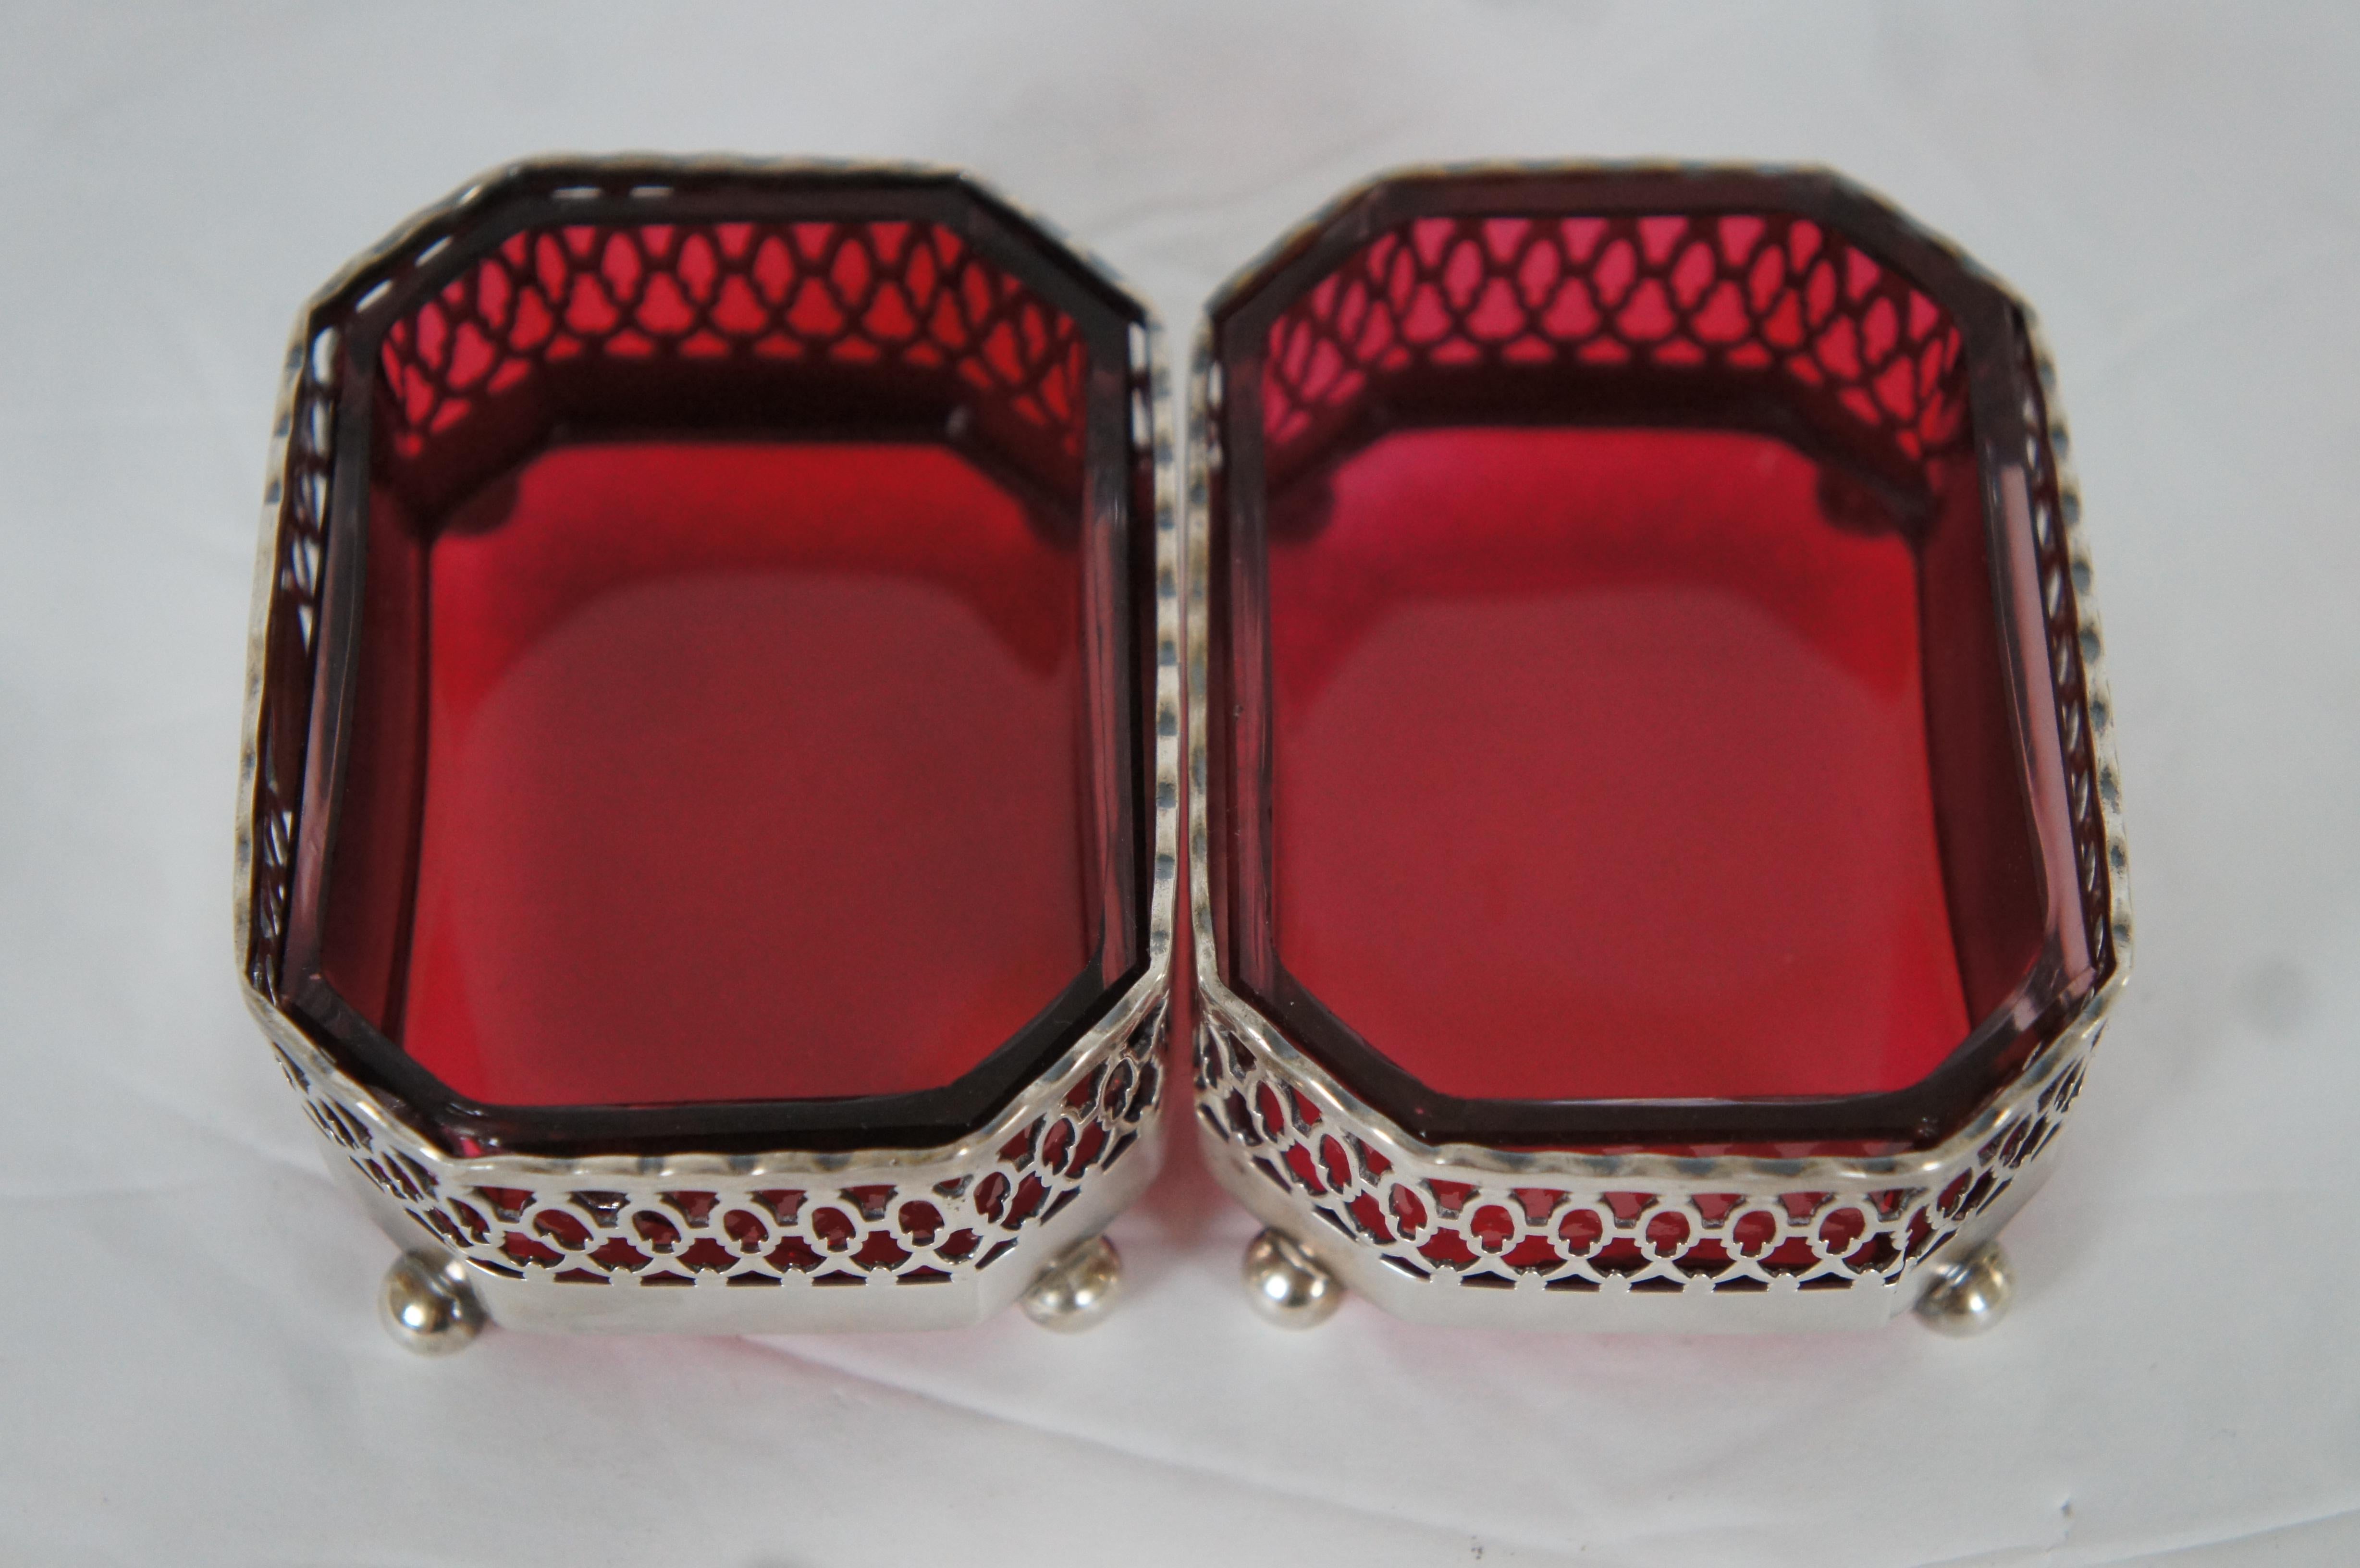 19th Century 2 Dominick & Haff 720 Reticulated Sterling & Cranberry Glass Nut Dish Pair 86g